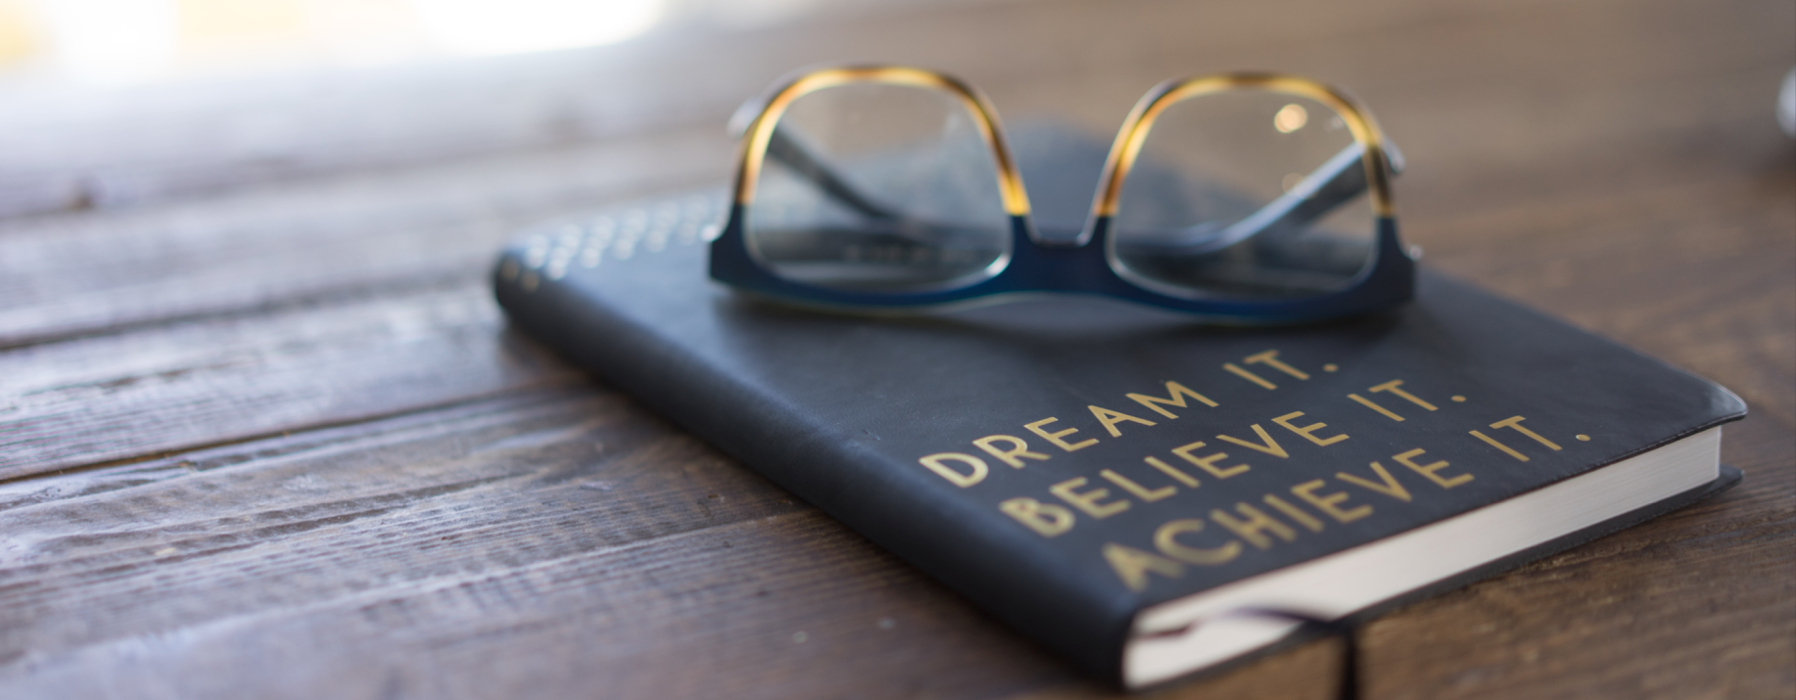 Glass on top of journal reading &quot;Dream it. Believe it. Achieve it.&quot; Photo for Unsplash by Carolyn Christine.